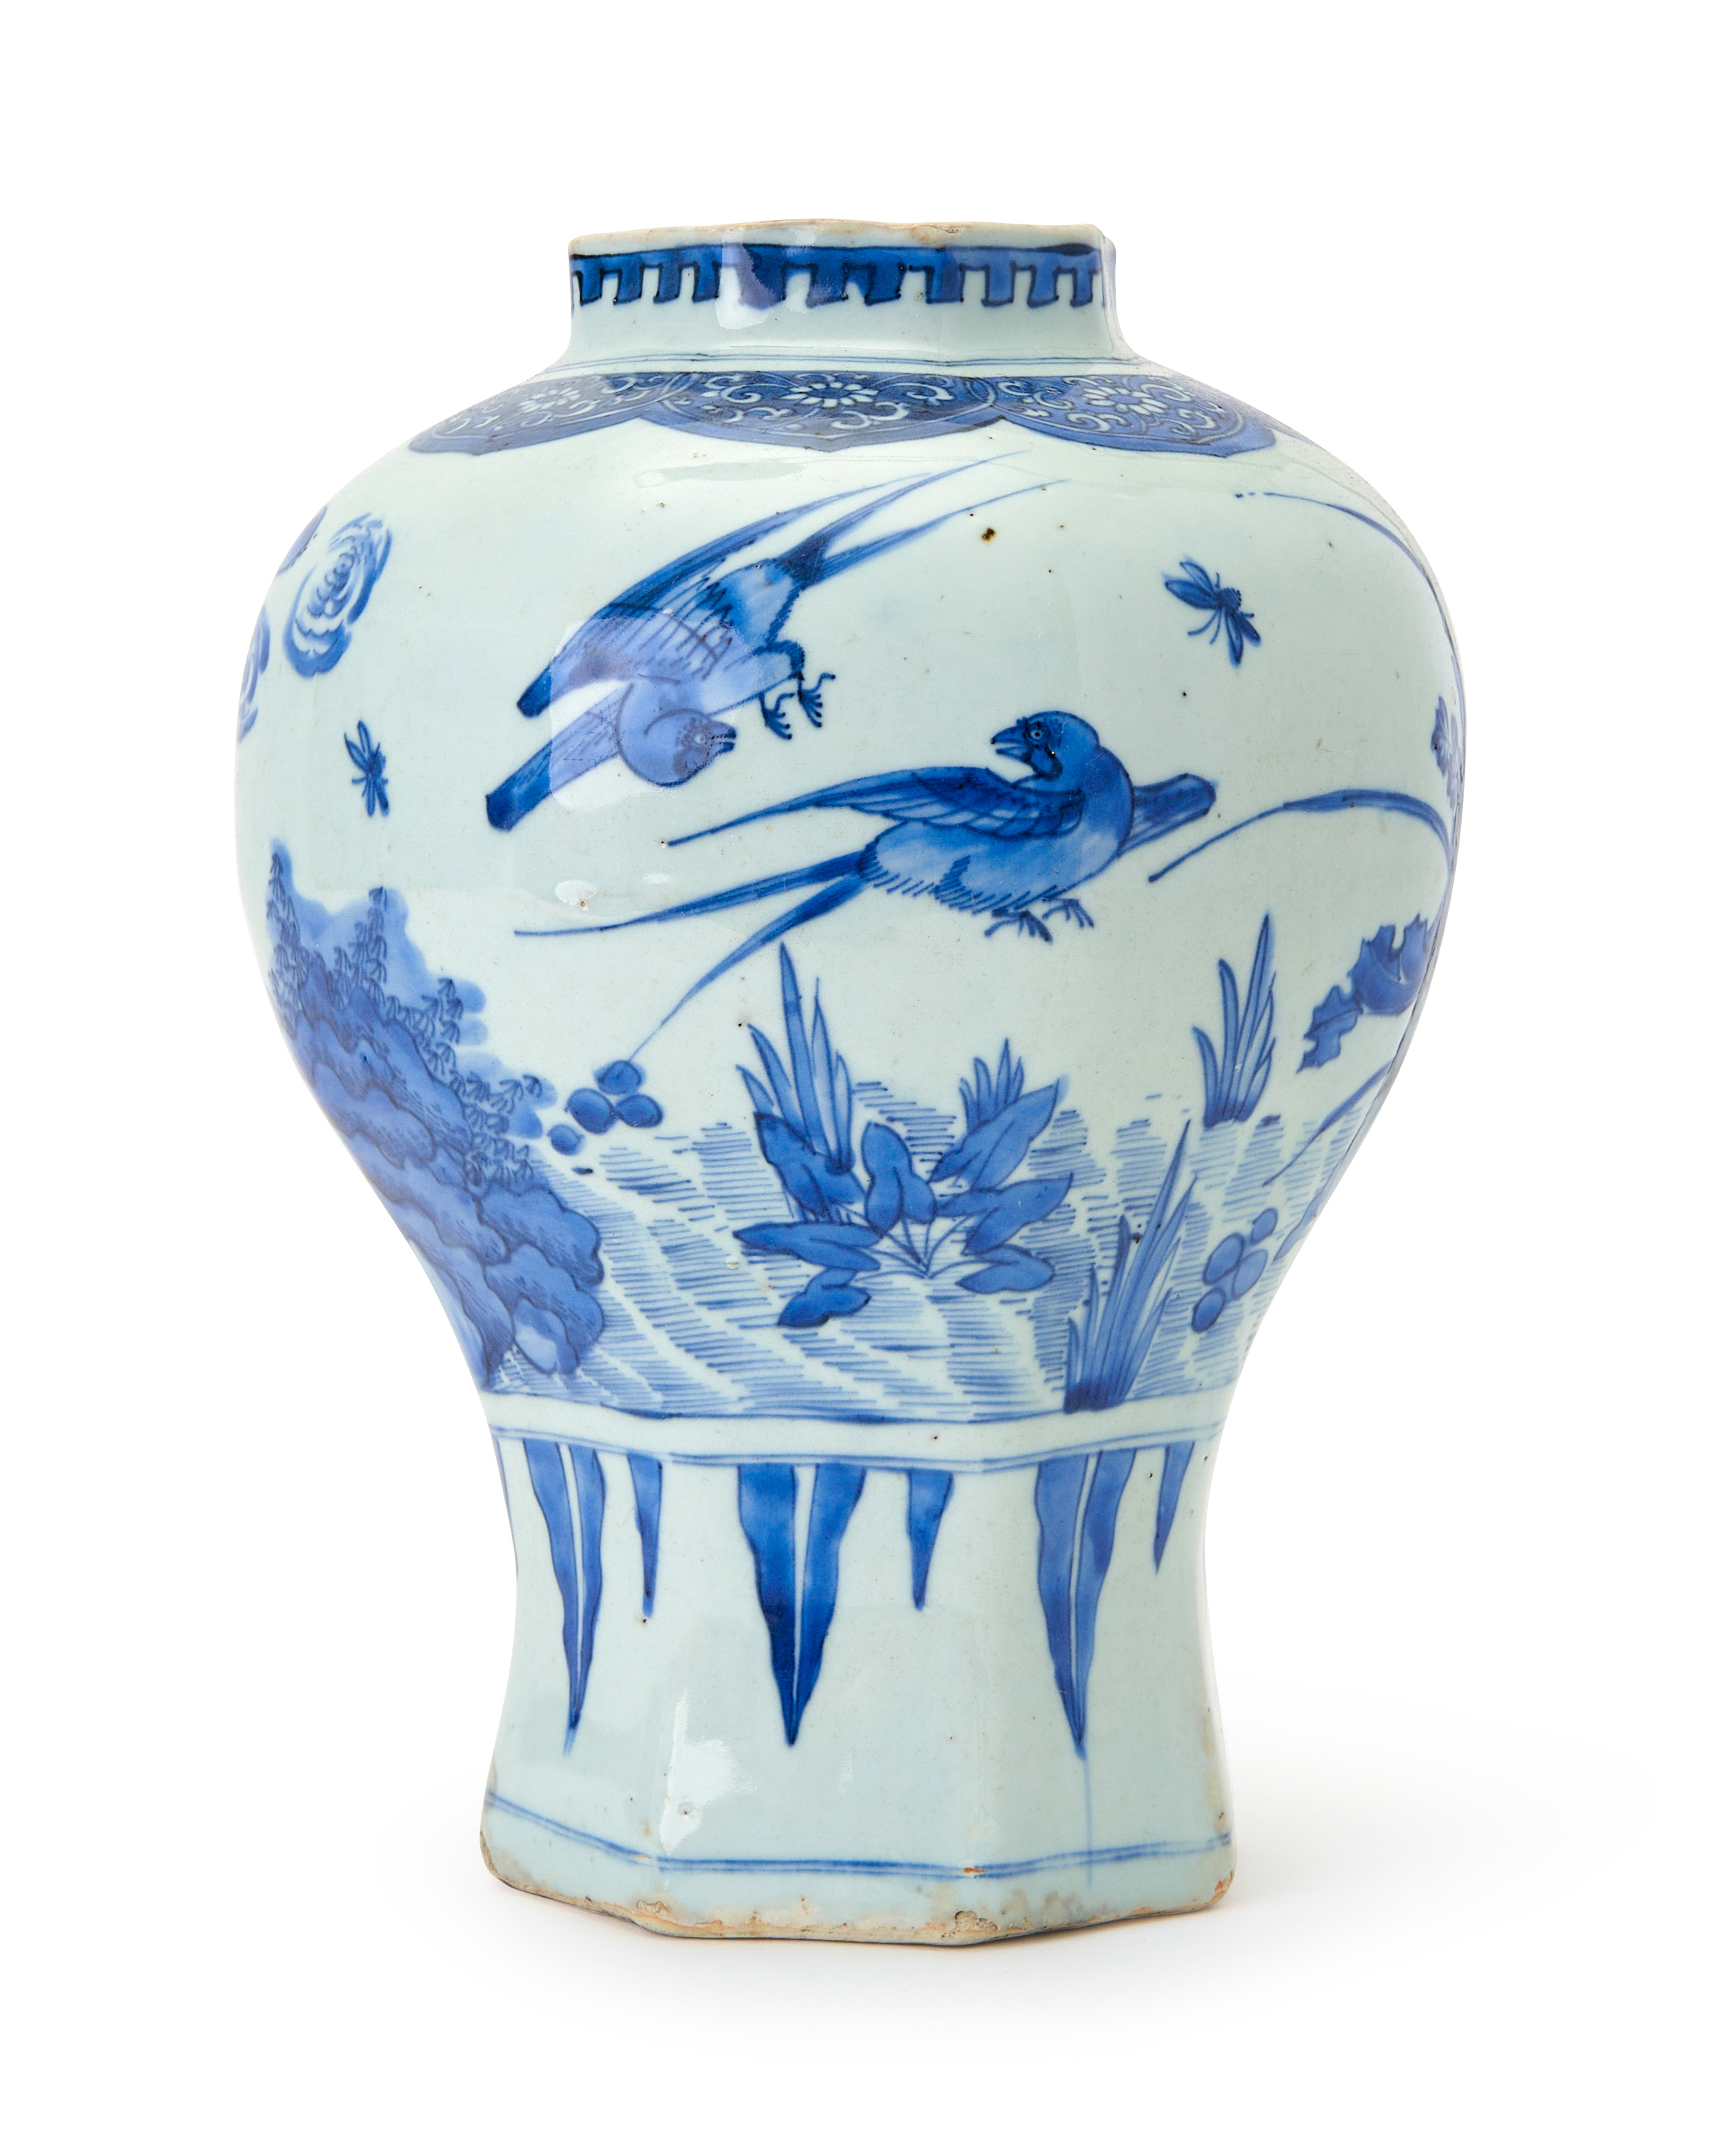 A CHINESE BLUE & WHITE JAR, TRANSITIONAL PERIOD, 17TH CENTURY - Image 3 of 4